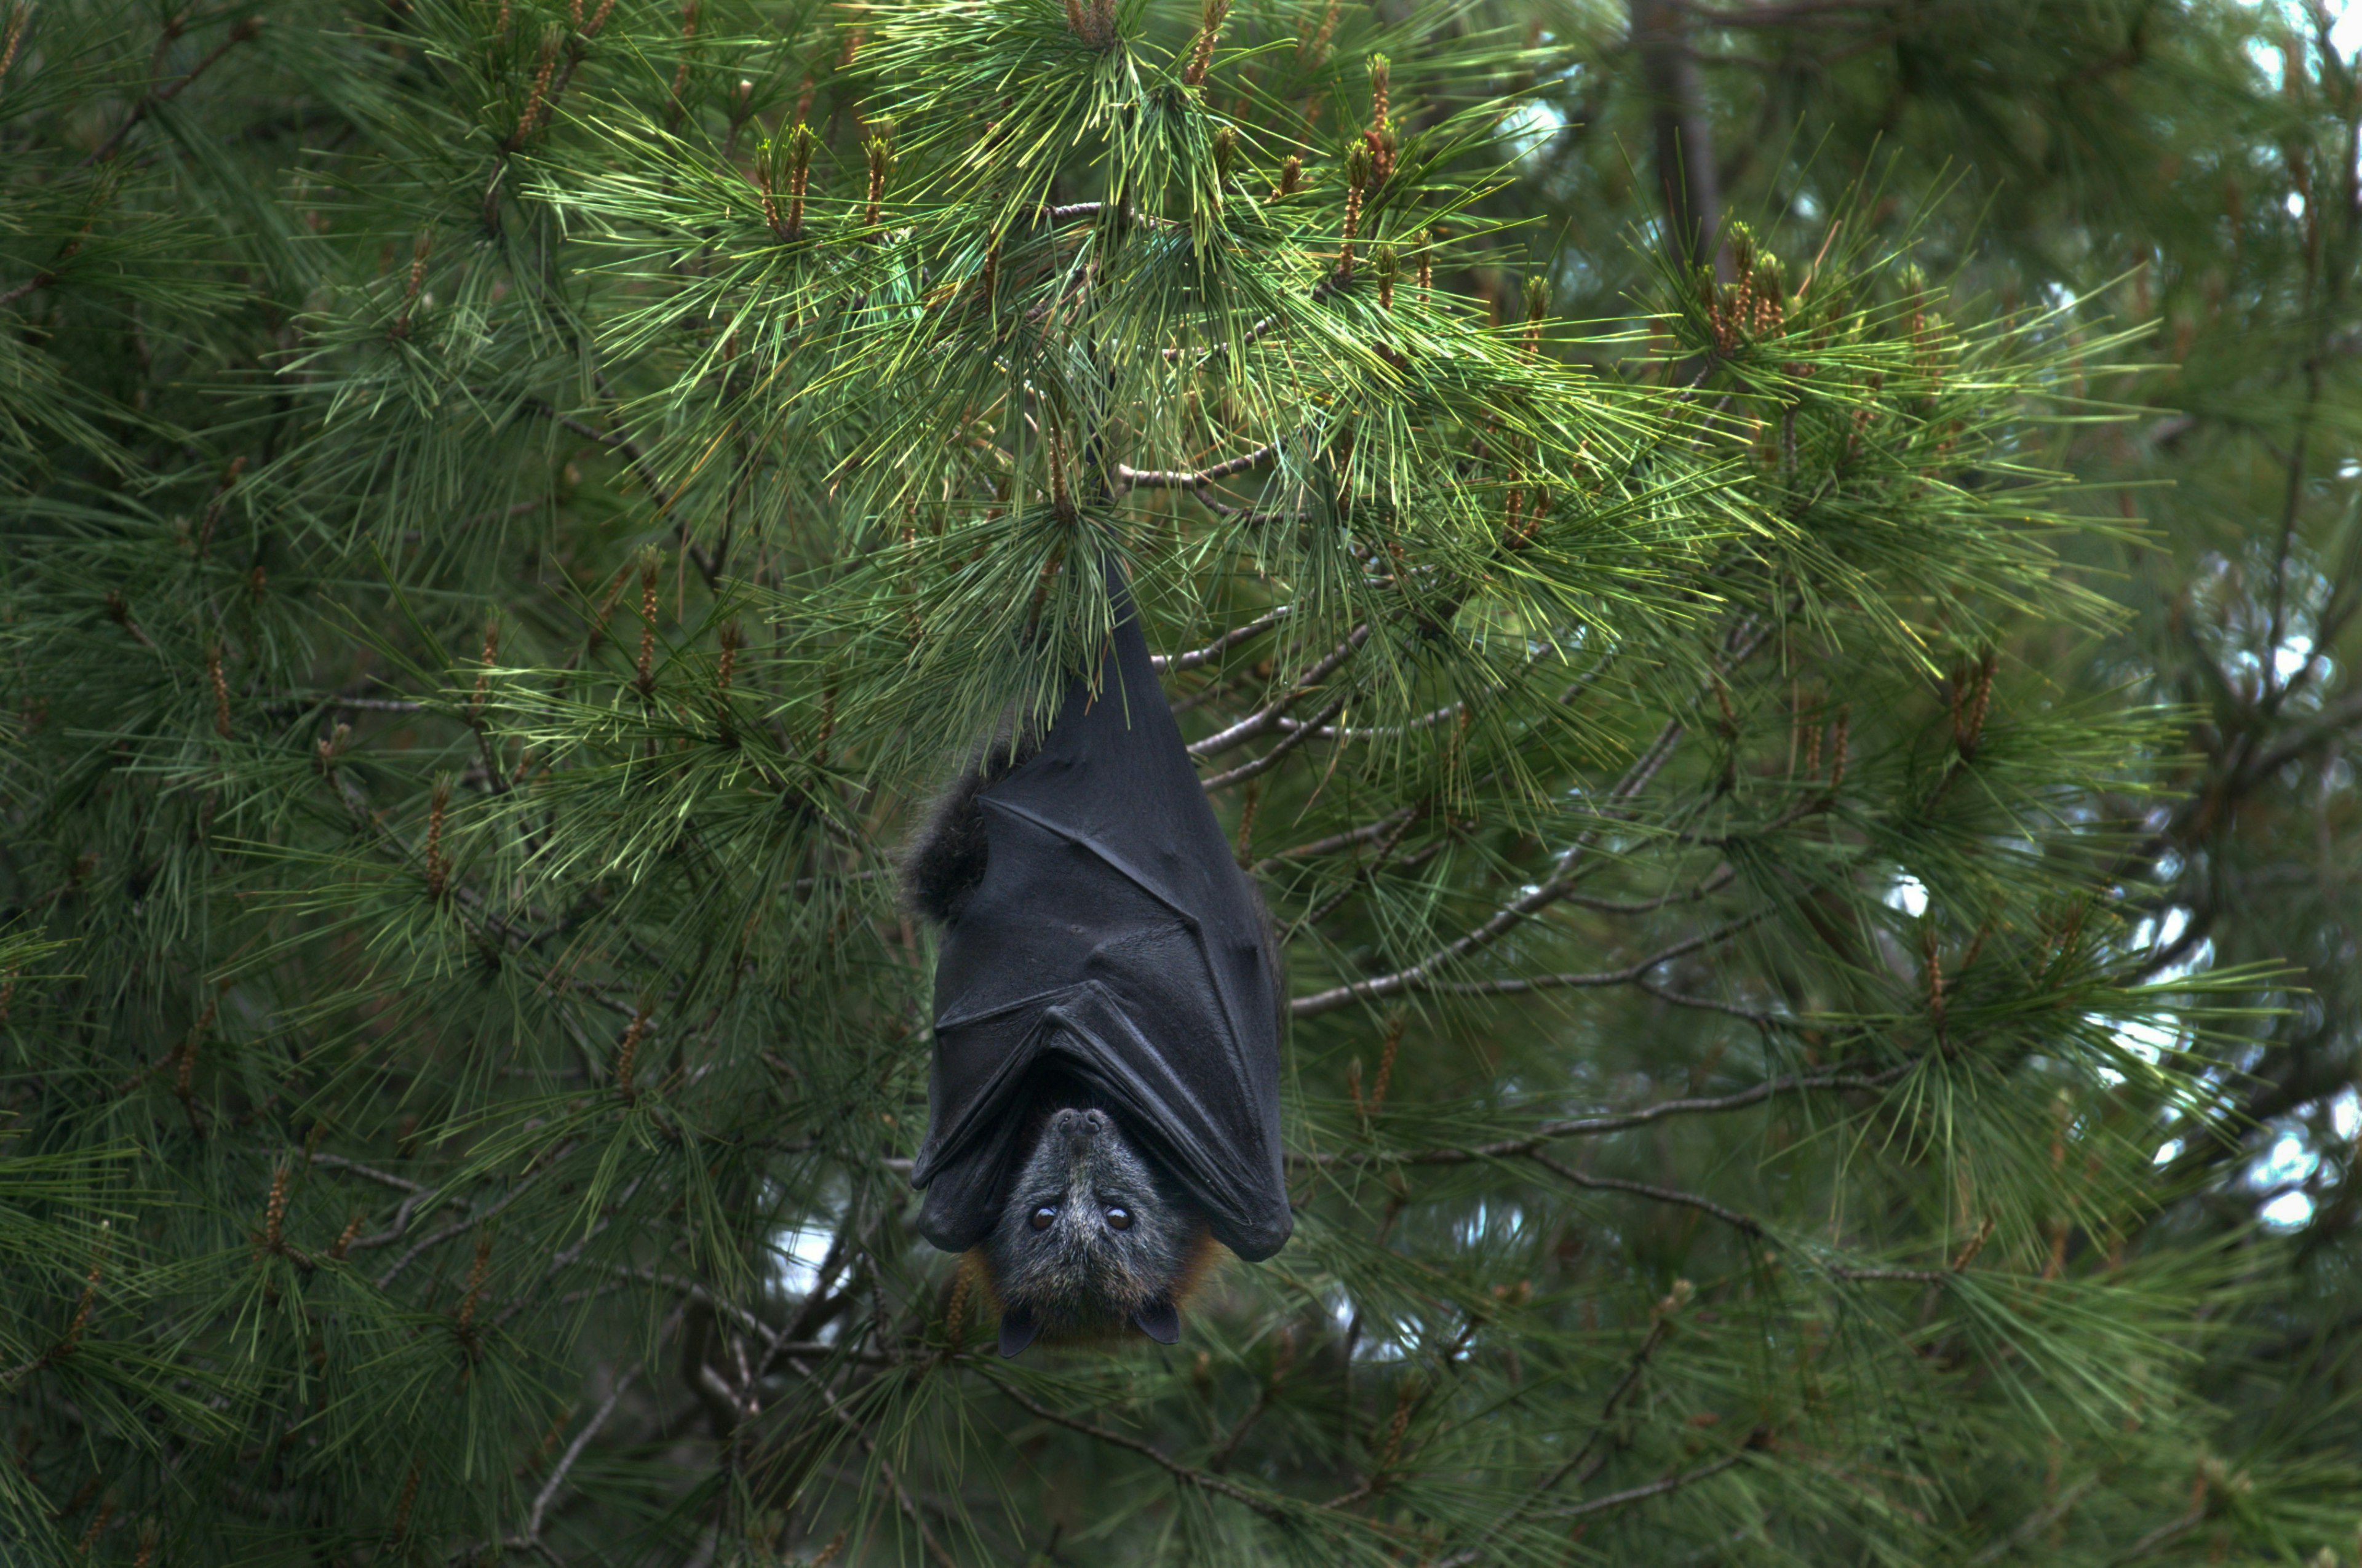 a large bat hanging in a pine tree